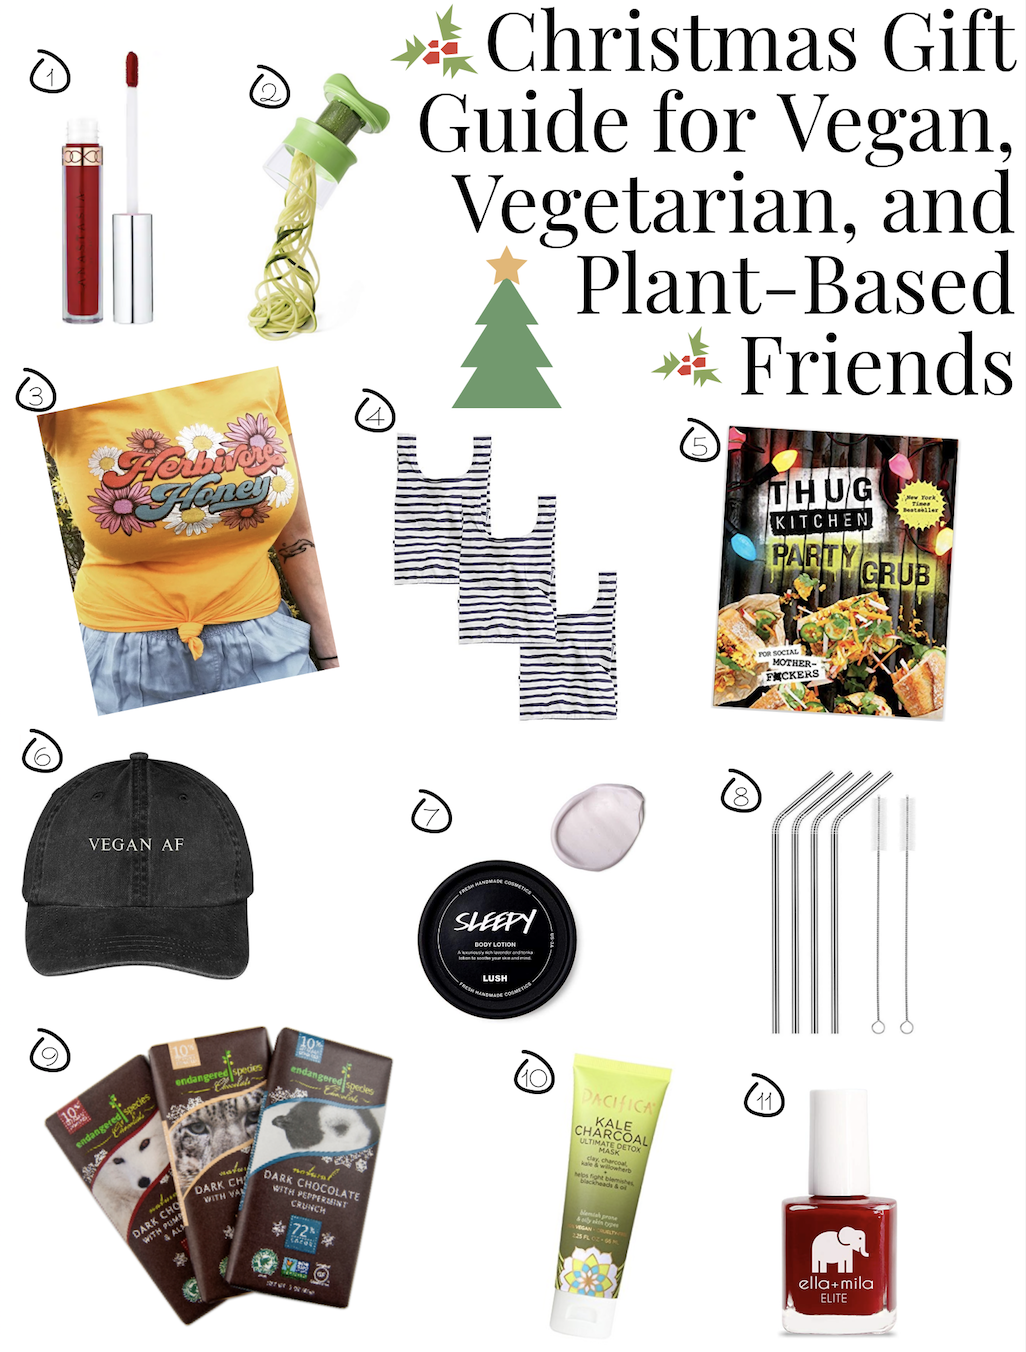 Christmas Gift Guide for Vegan, Vegetarian, and Plant-Based Friends